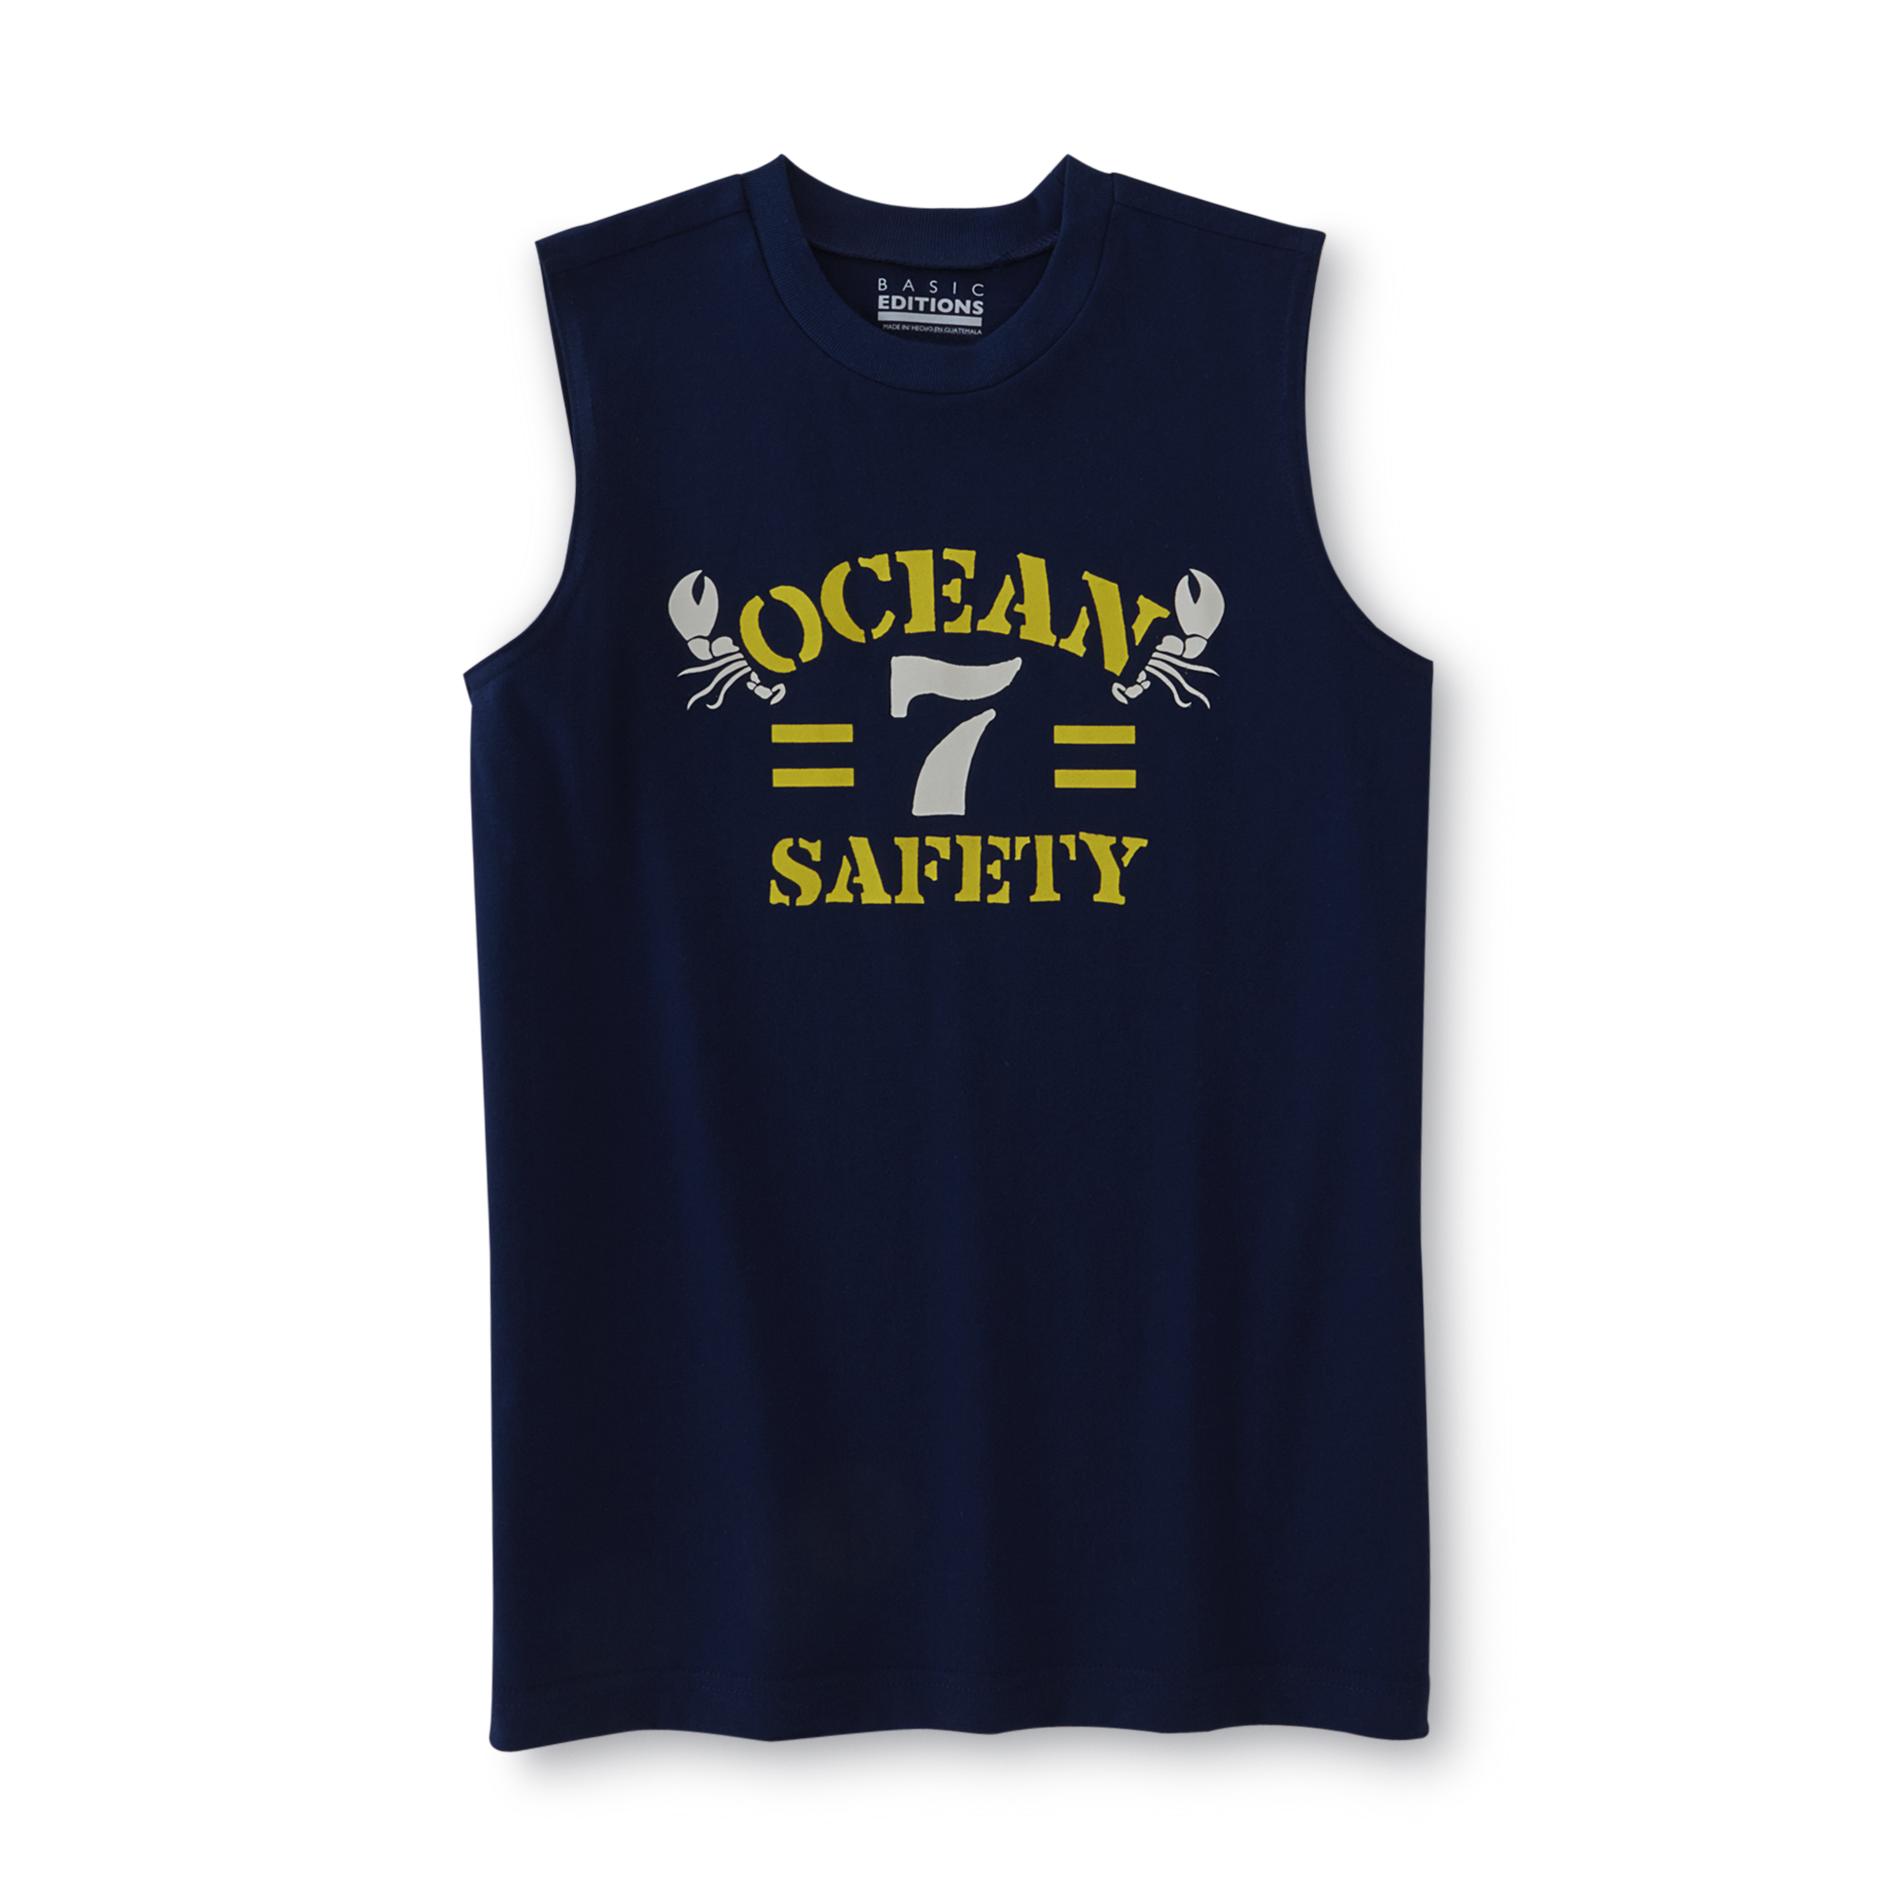 Basic Editions Boy's Graphic Muscle Shirt - Ocean Safety